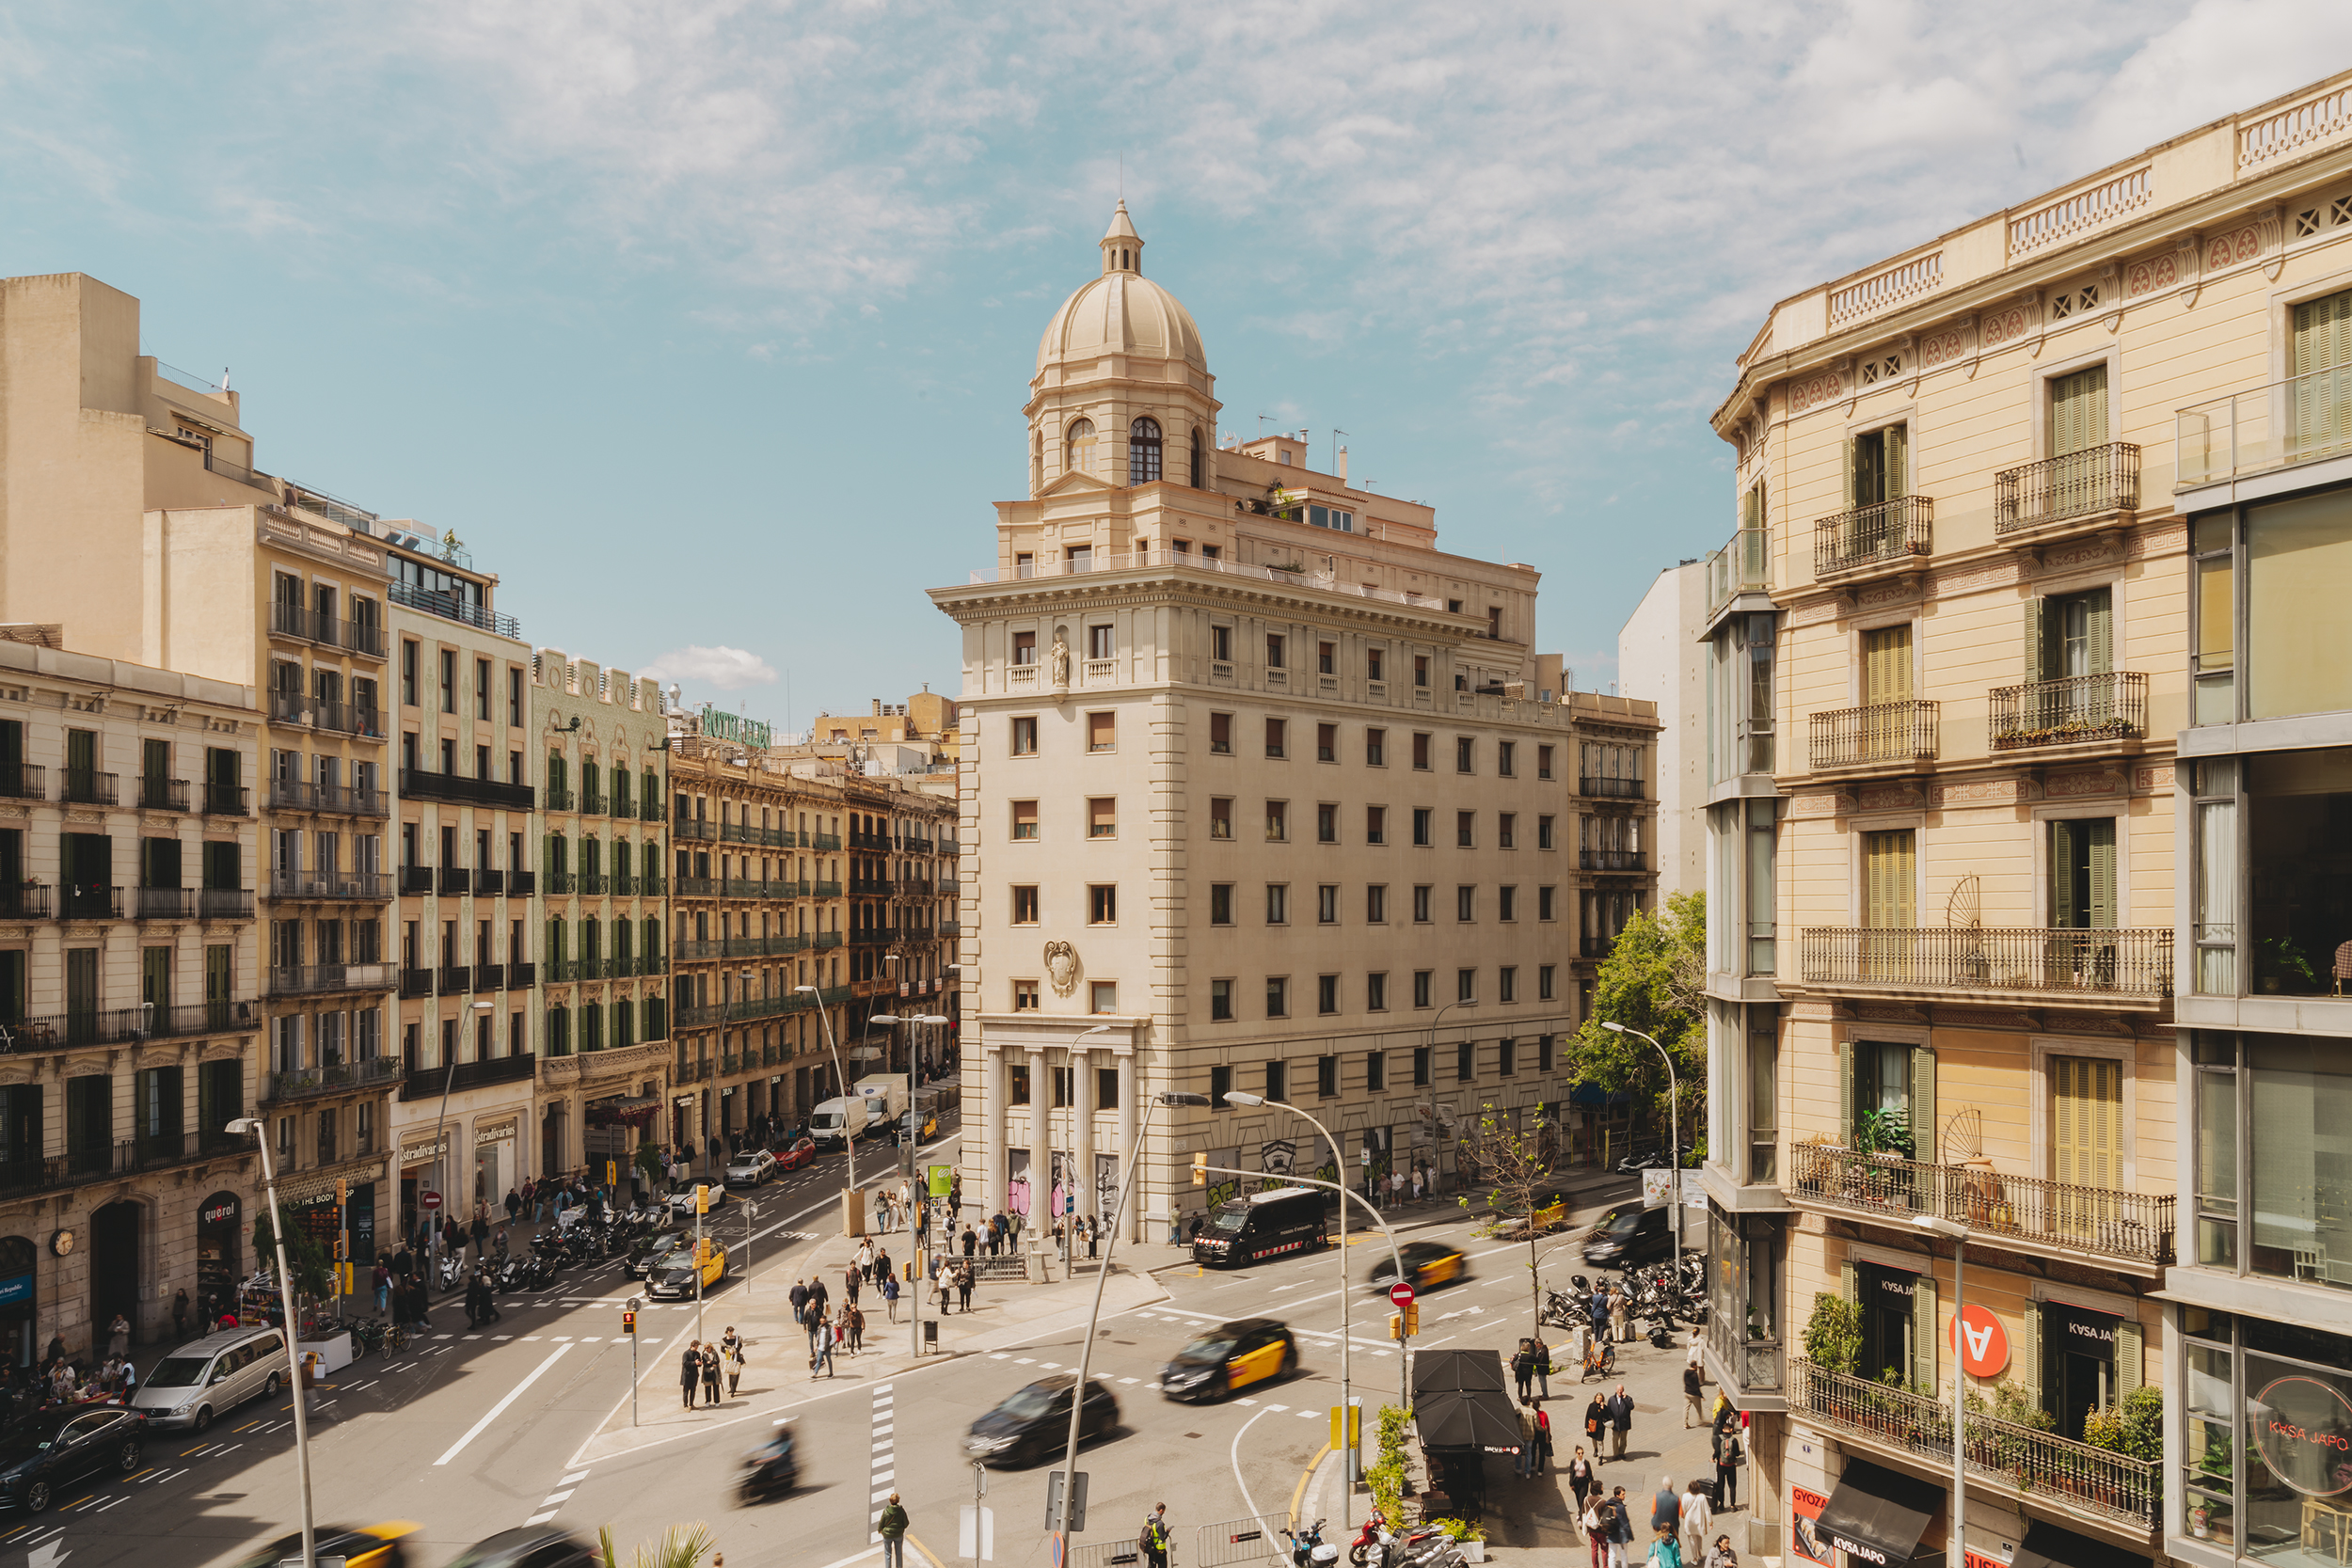 Barcelona reinvents itself: how some of the city's legendary establishments have been reborn